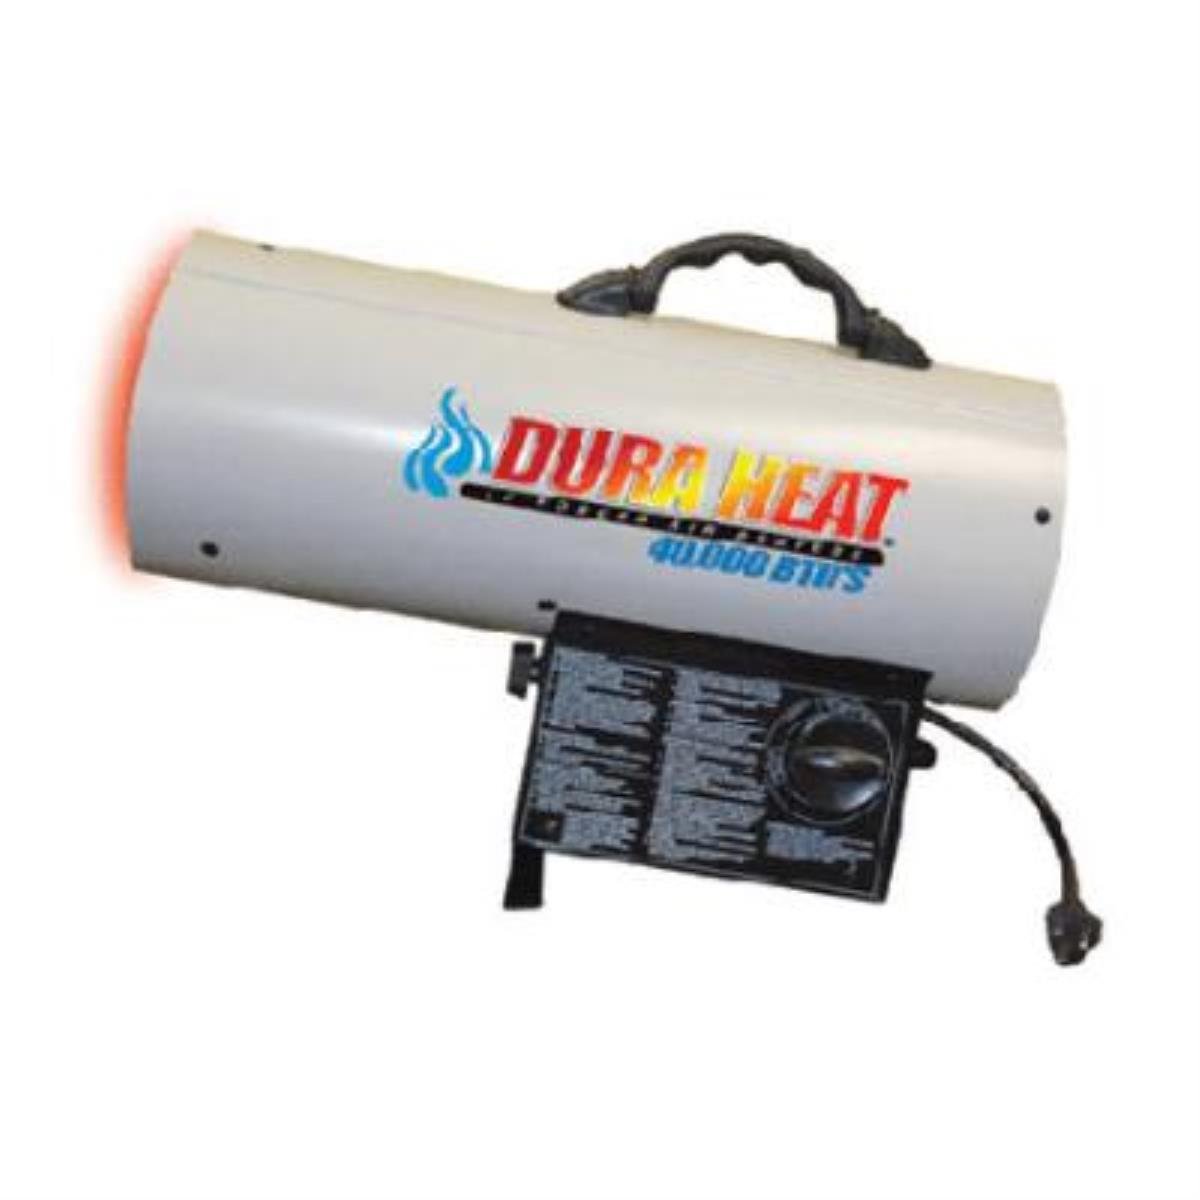 Forced Air Propane Heater, 40,000 Btu, Heats Up To 900 Square Feet, With Lp